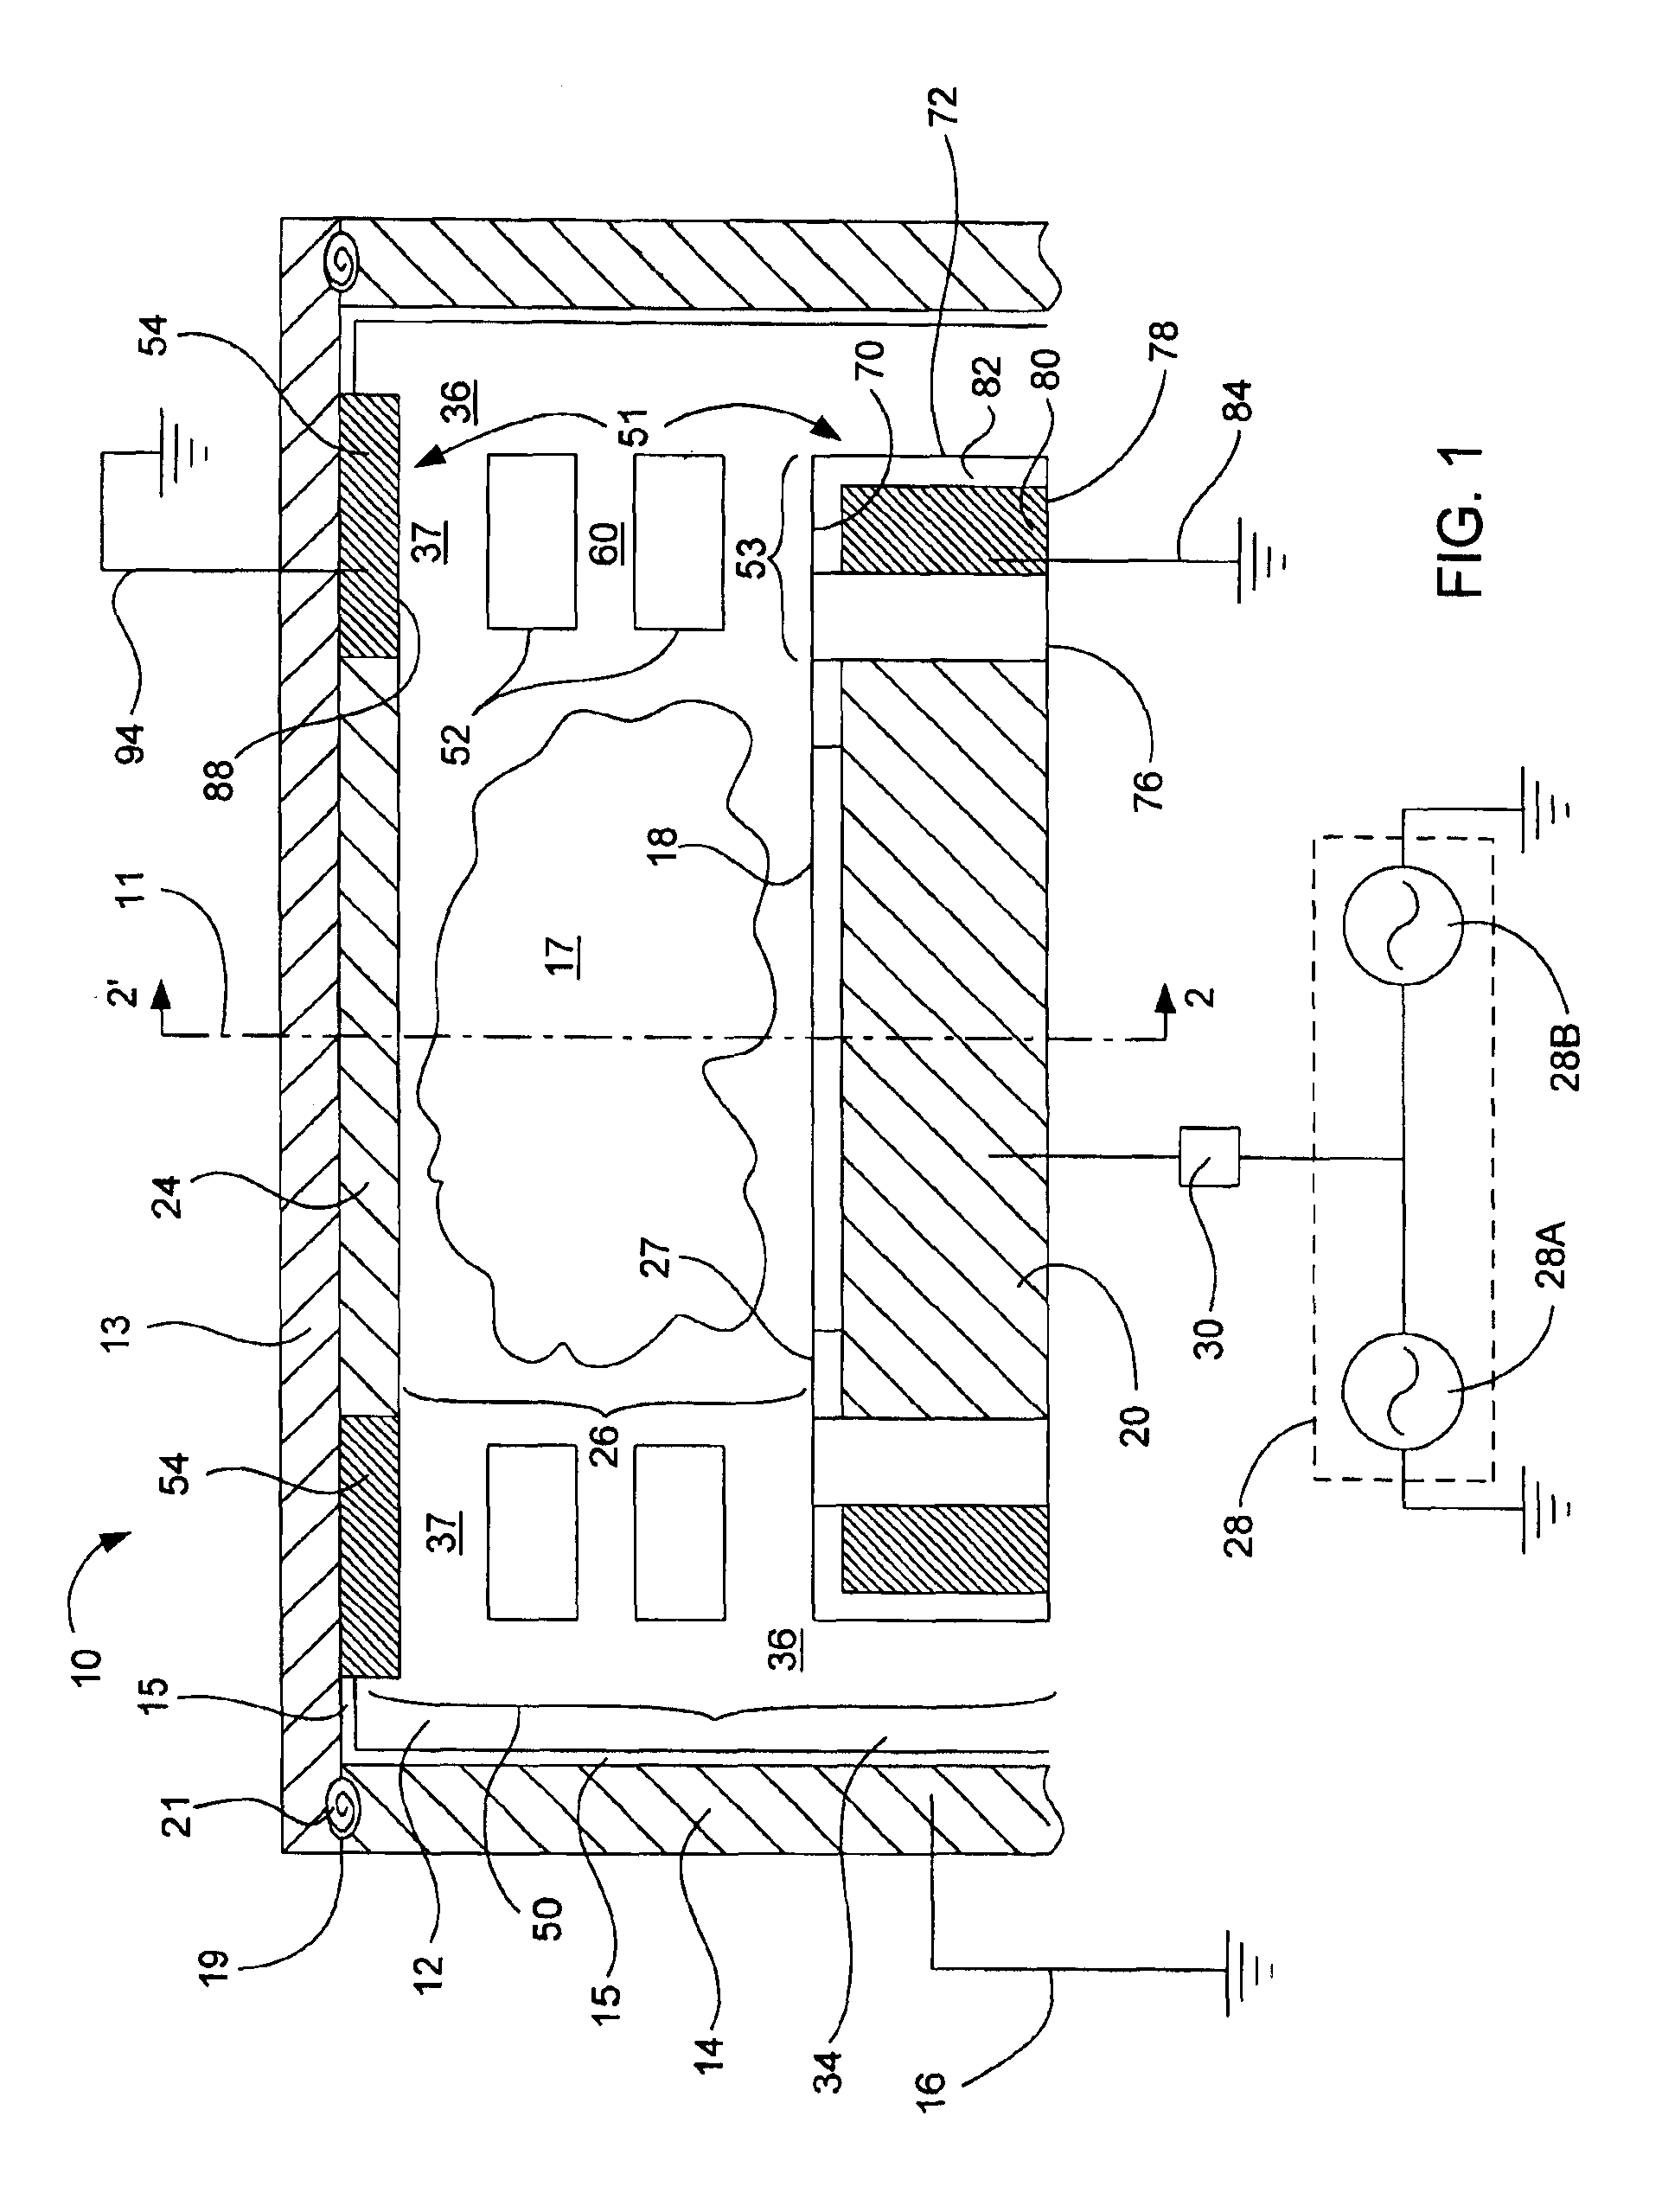 Chamber configuration for confining a plasma